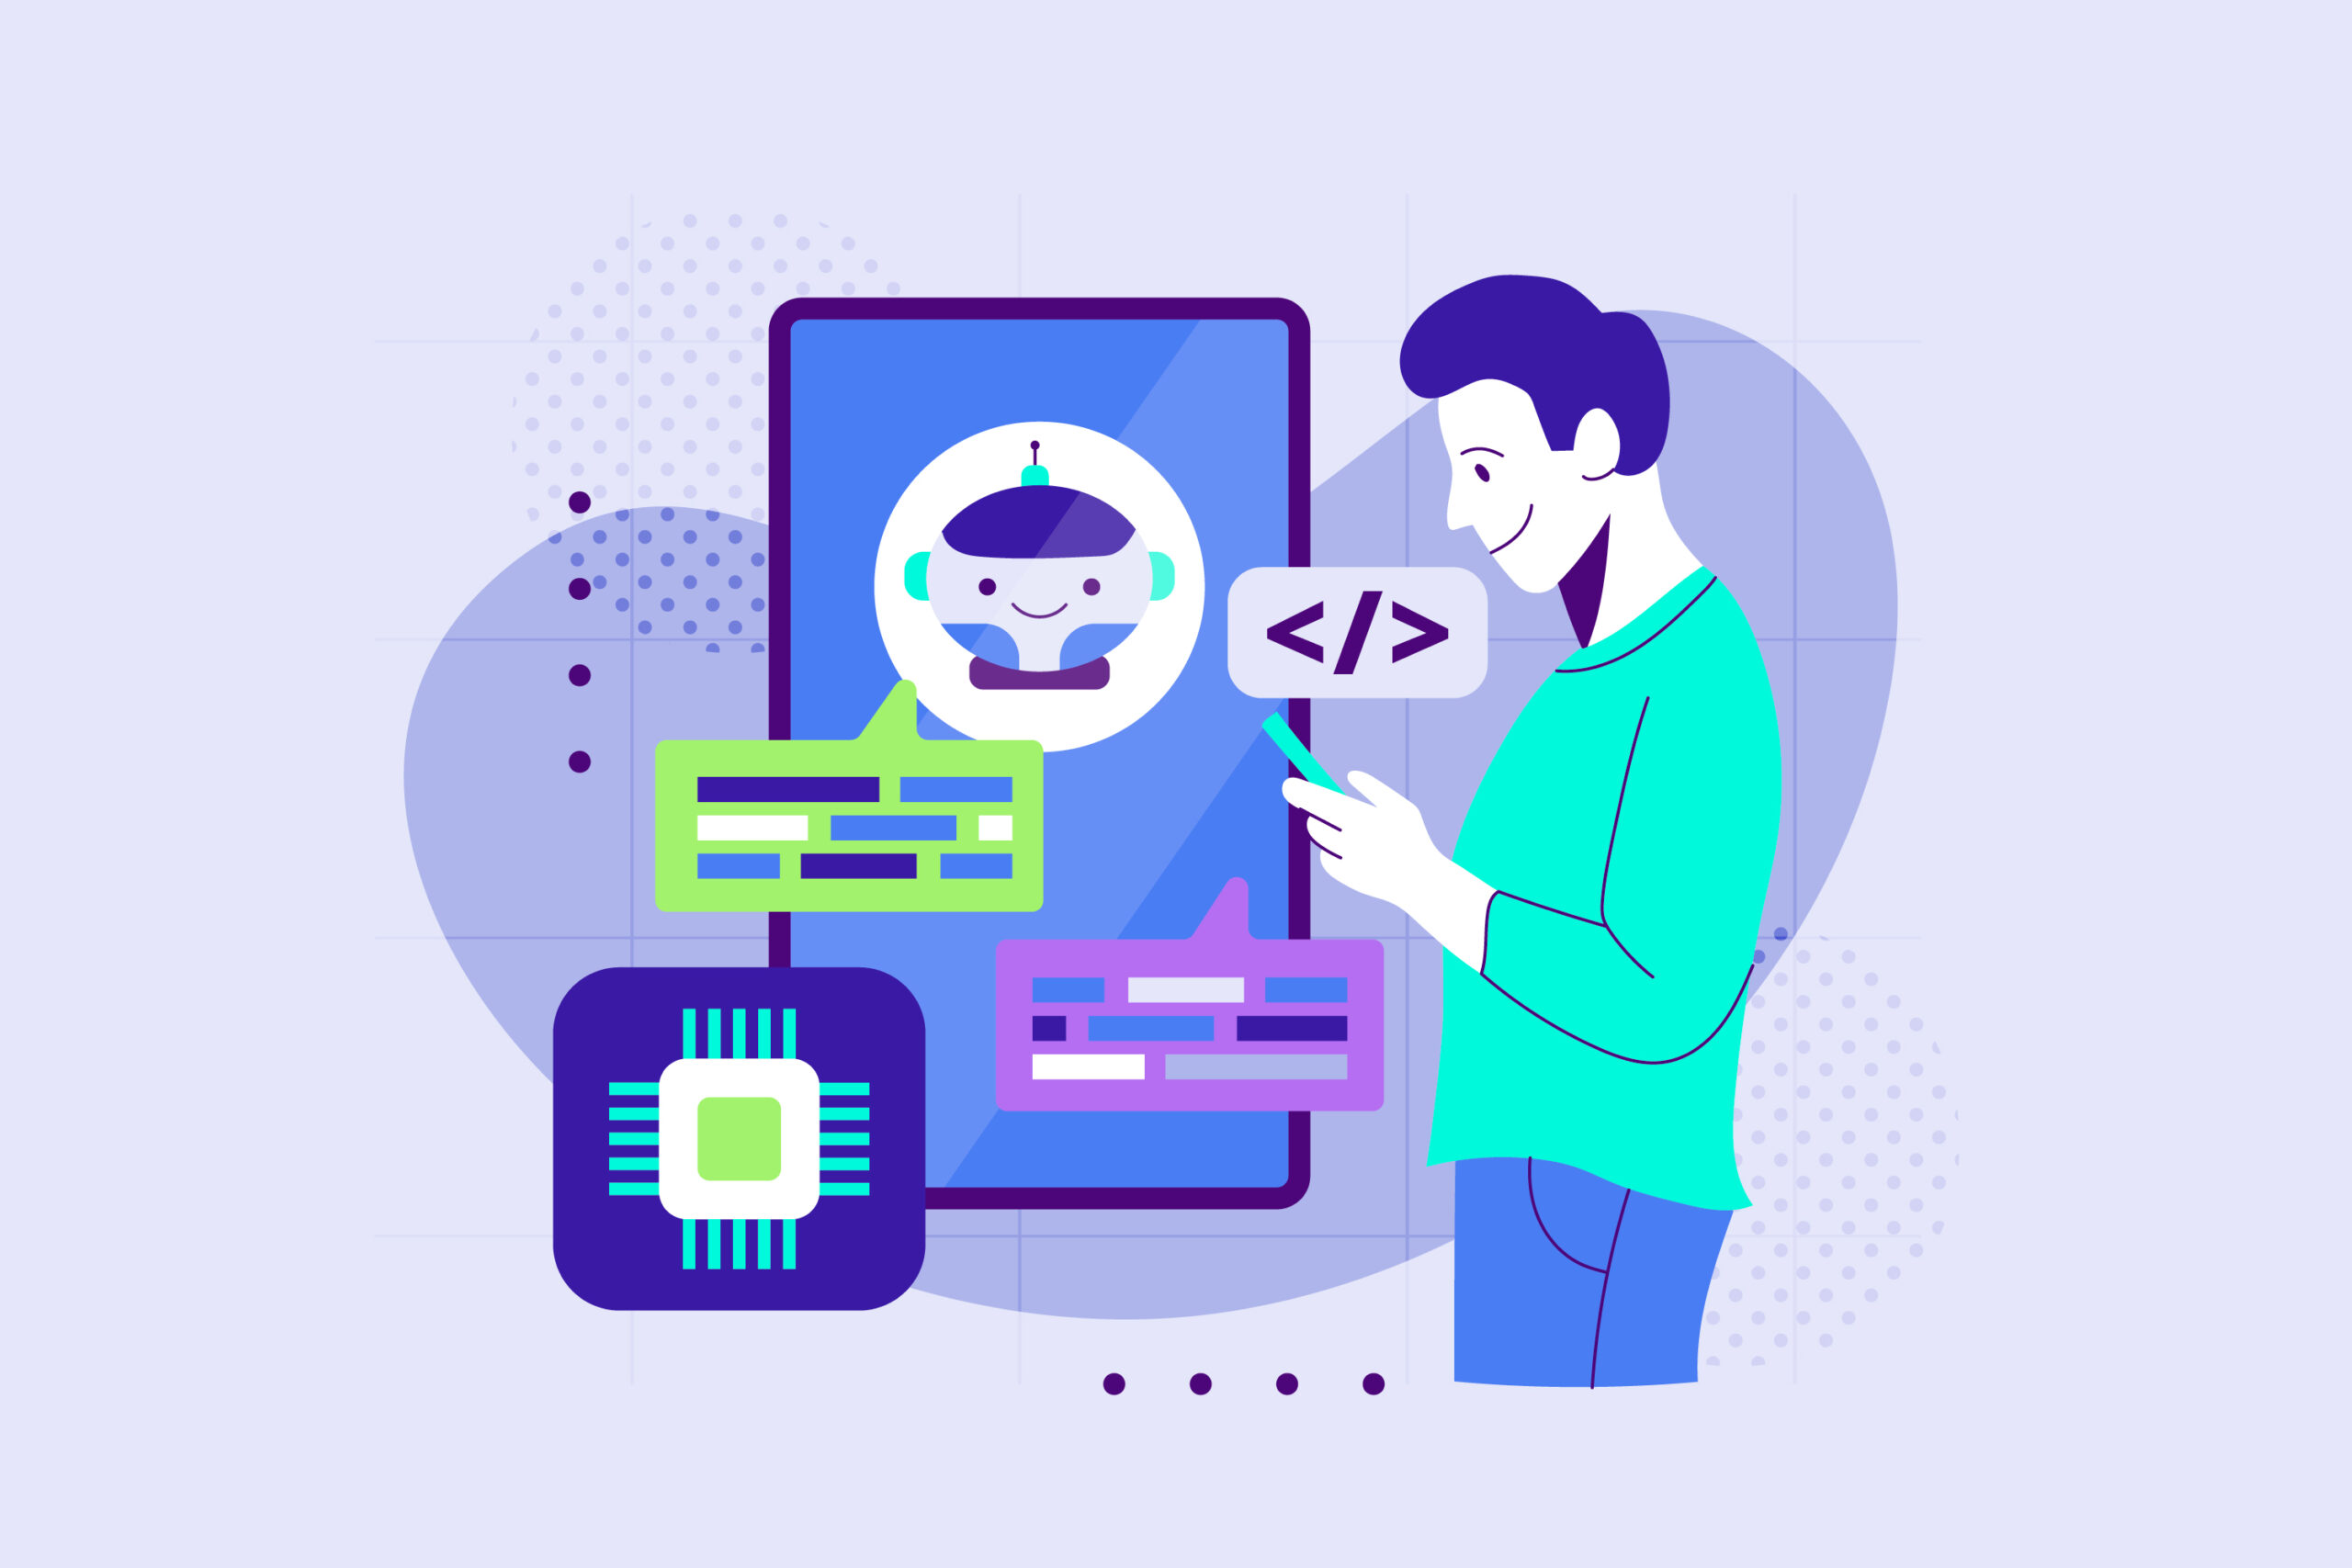 Simplifying Customer Error Messages with Probyto AI’s Natural Language Processing